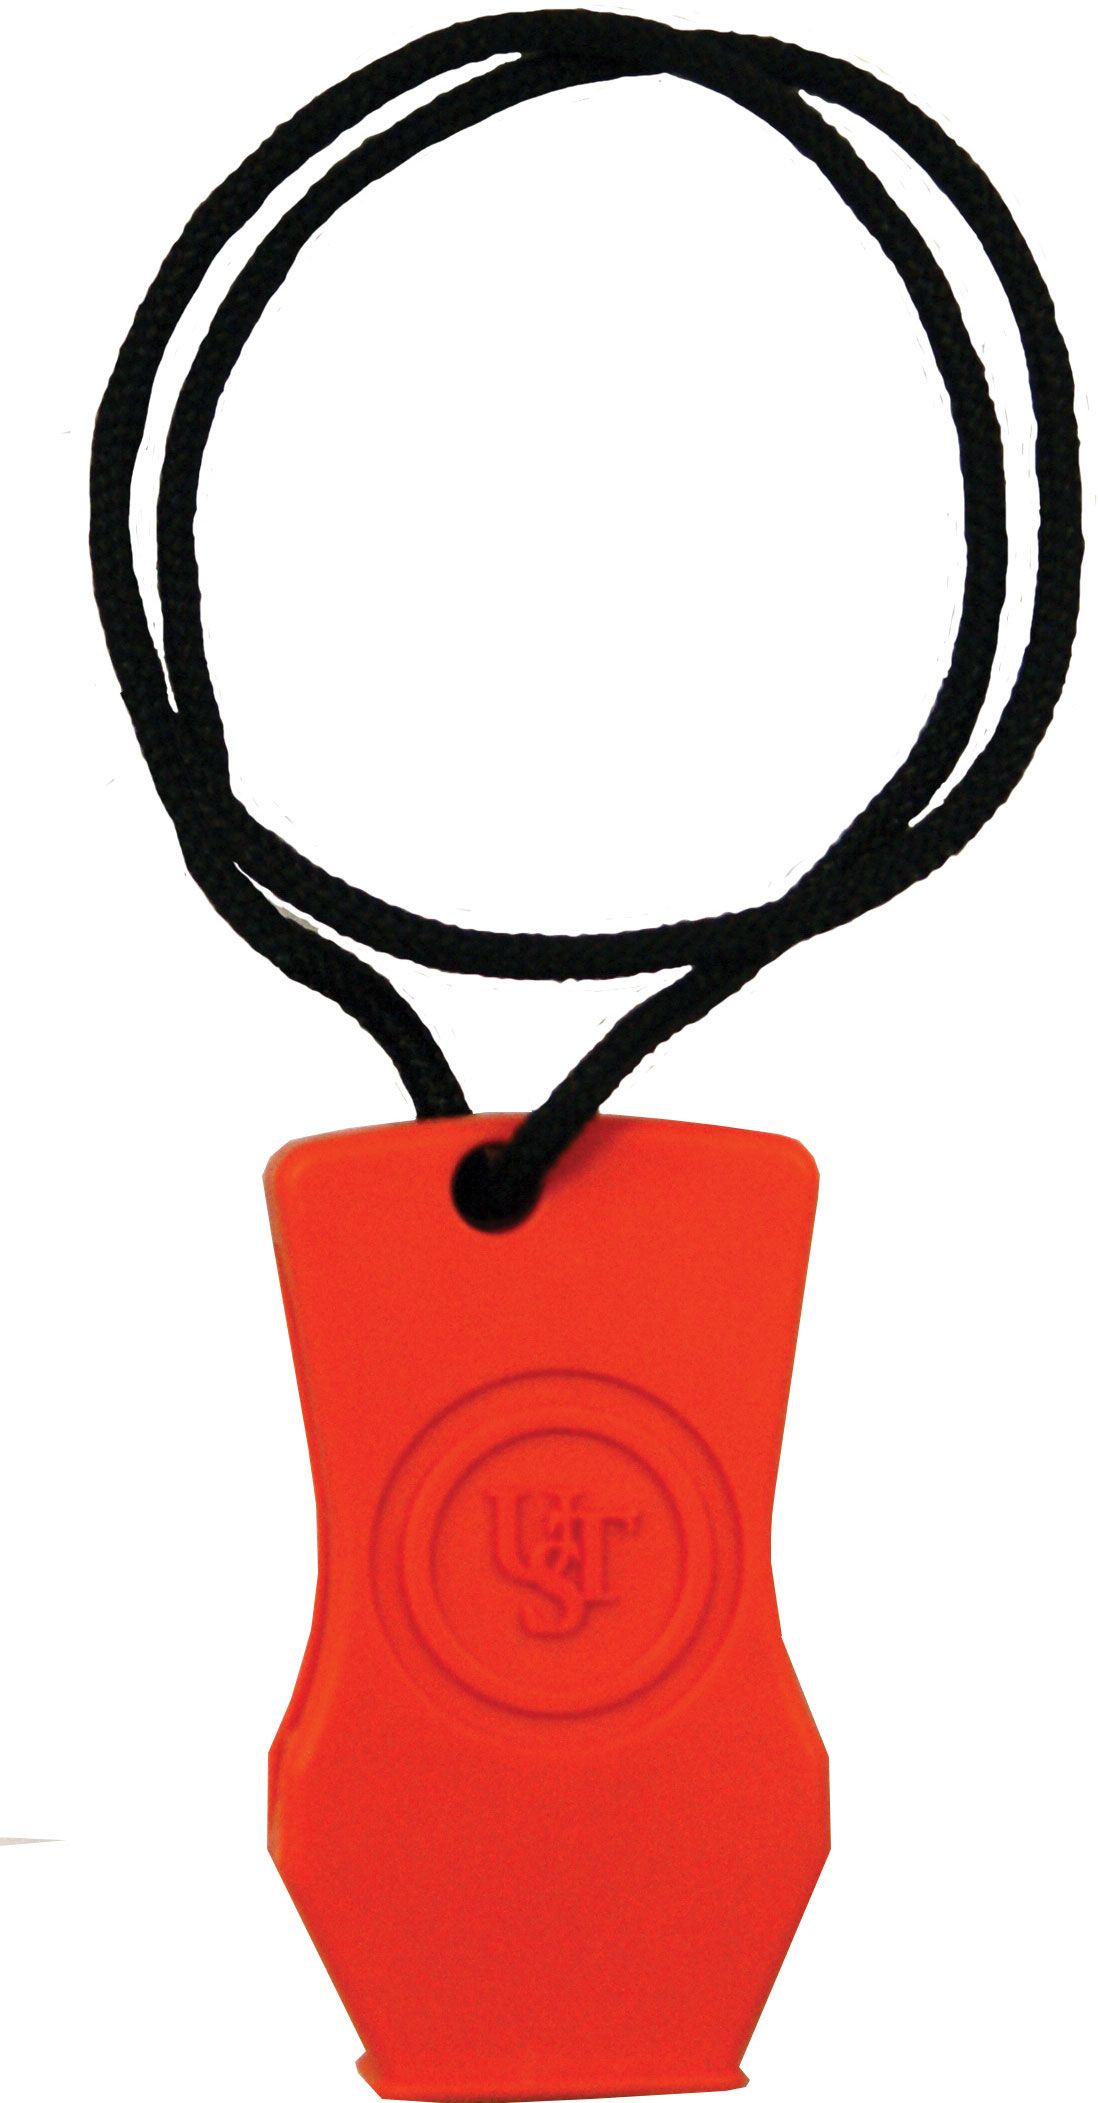 Compact UST JetScream Floating Whistle with Powerful 122 dB Signal Pea-Less Lightweight Design and Lanyard for Use in Emergency Situations and Outdoor Survival 